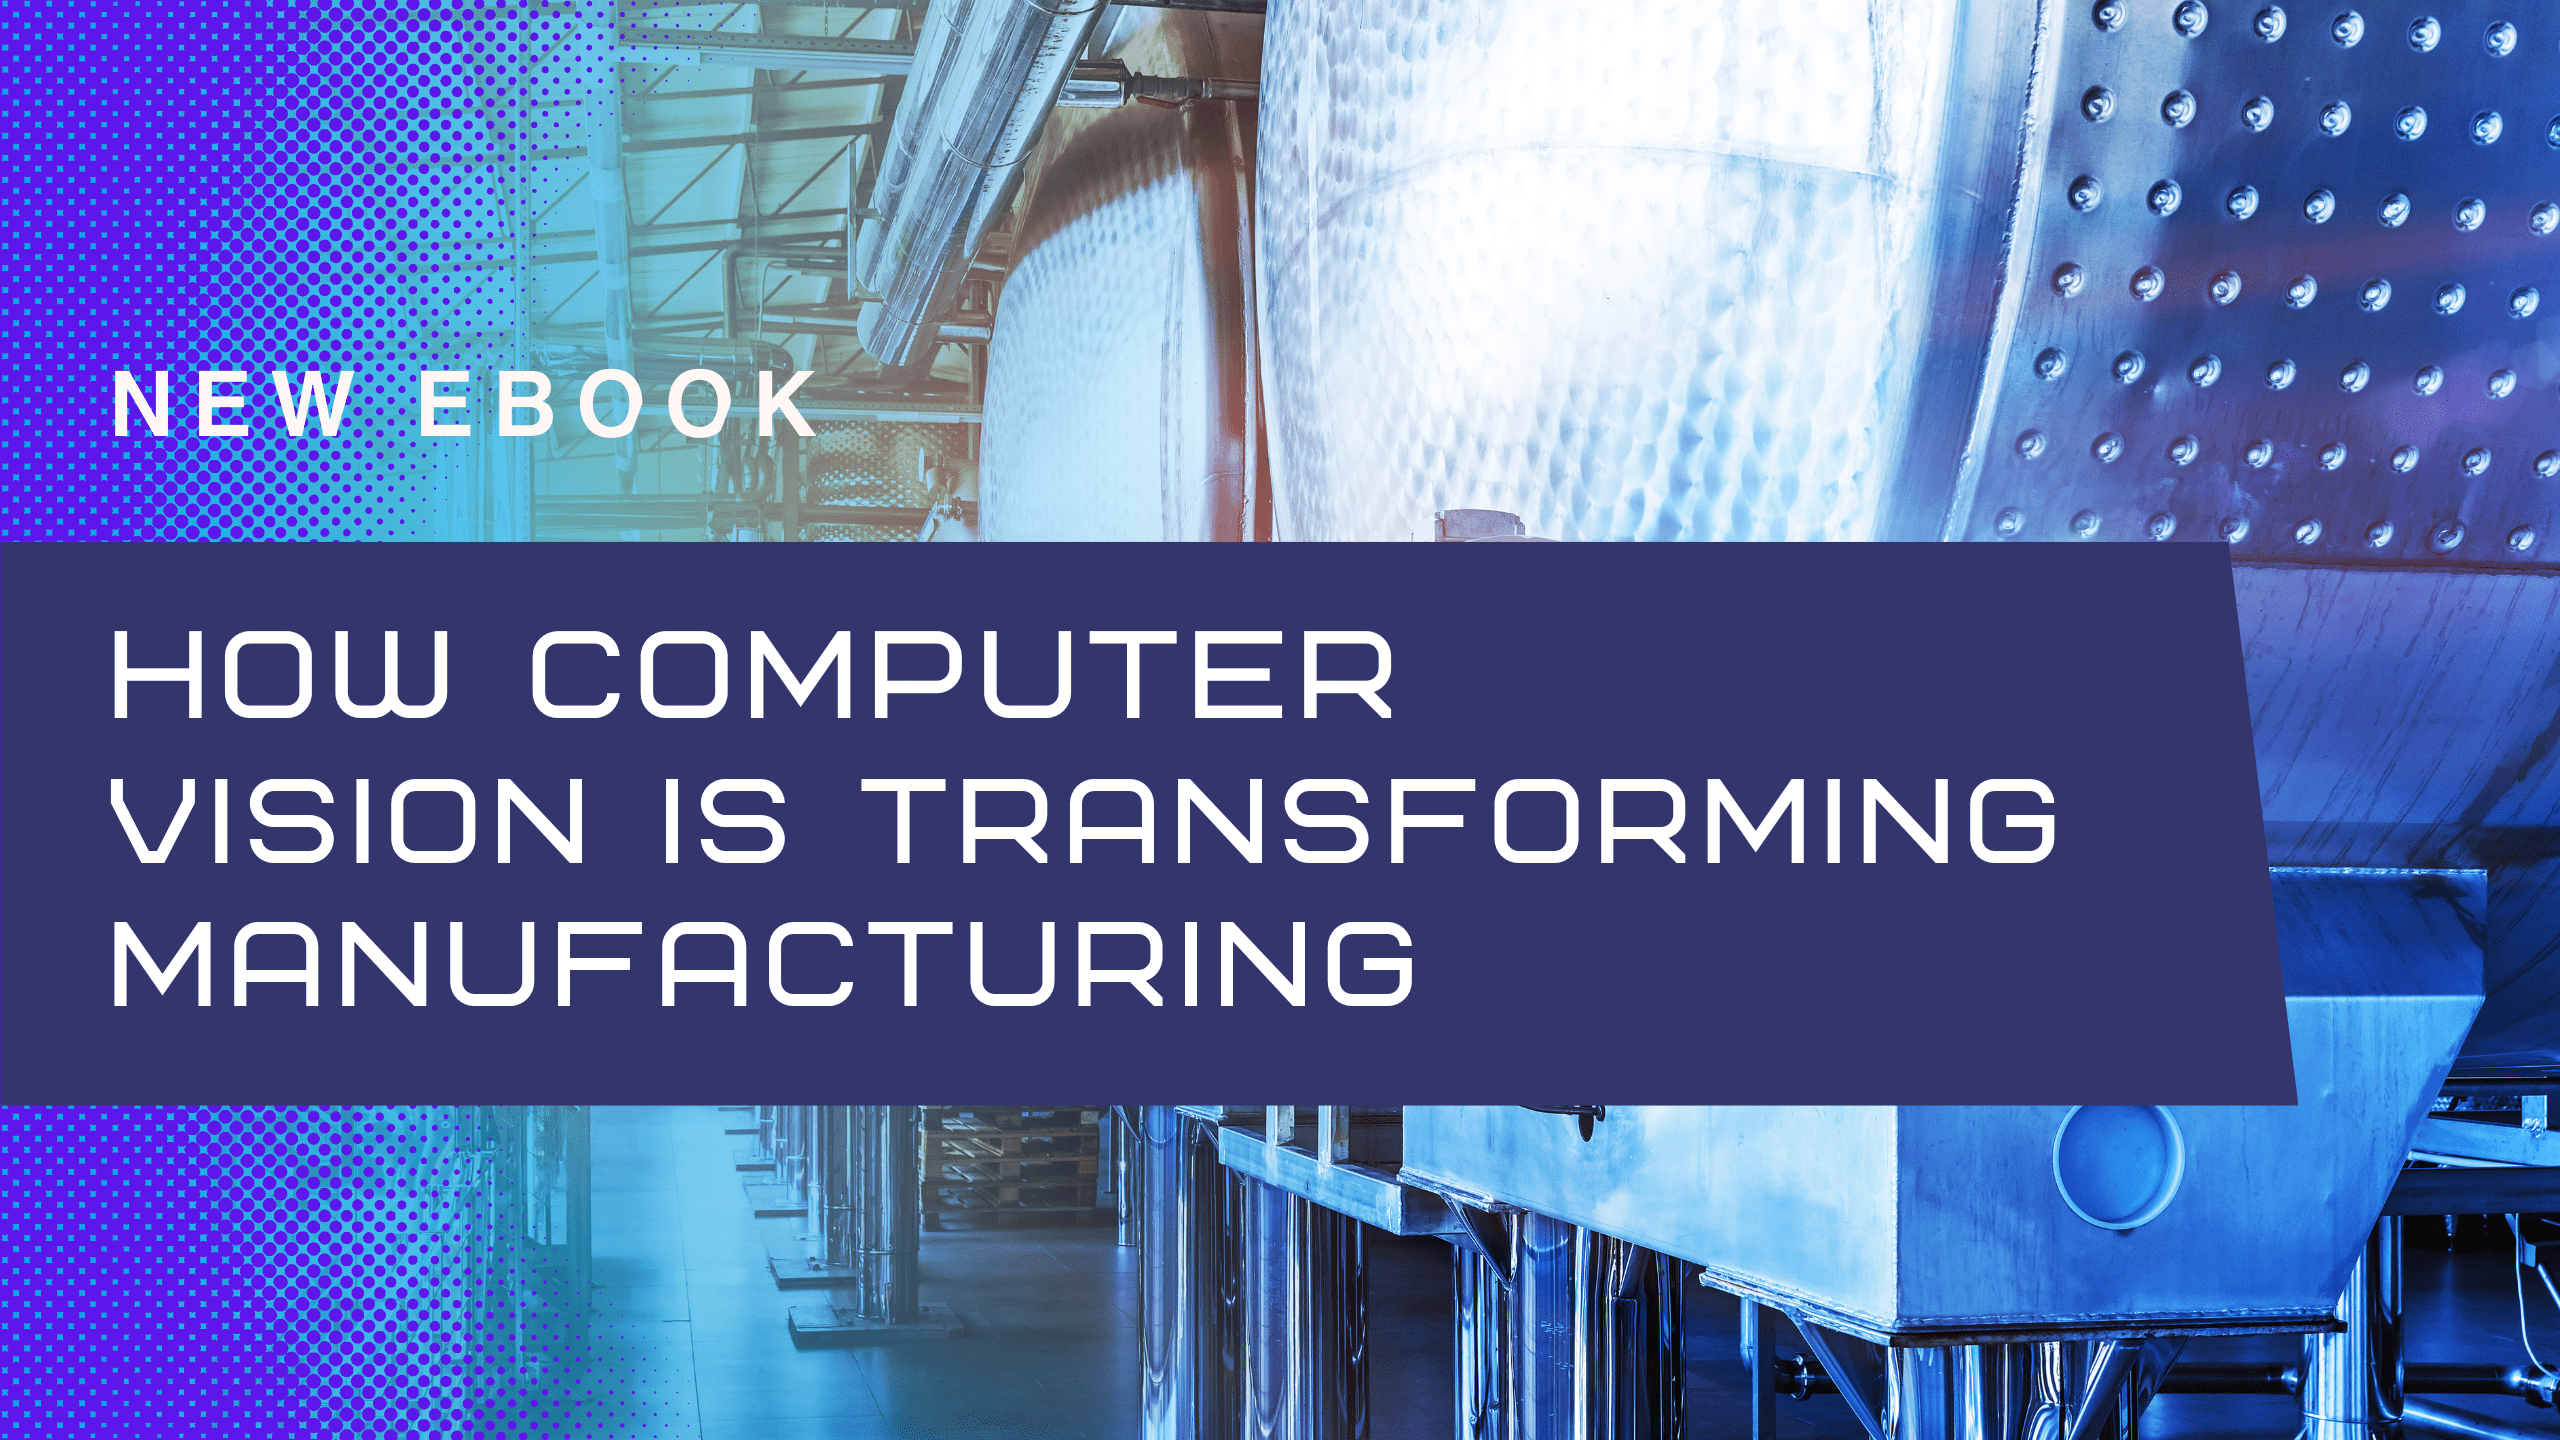 New ebook: how computer vision is transforming manufacturing